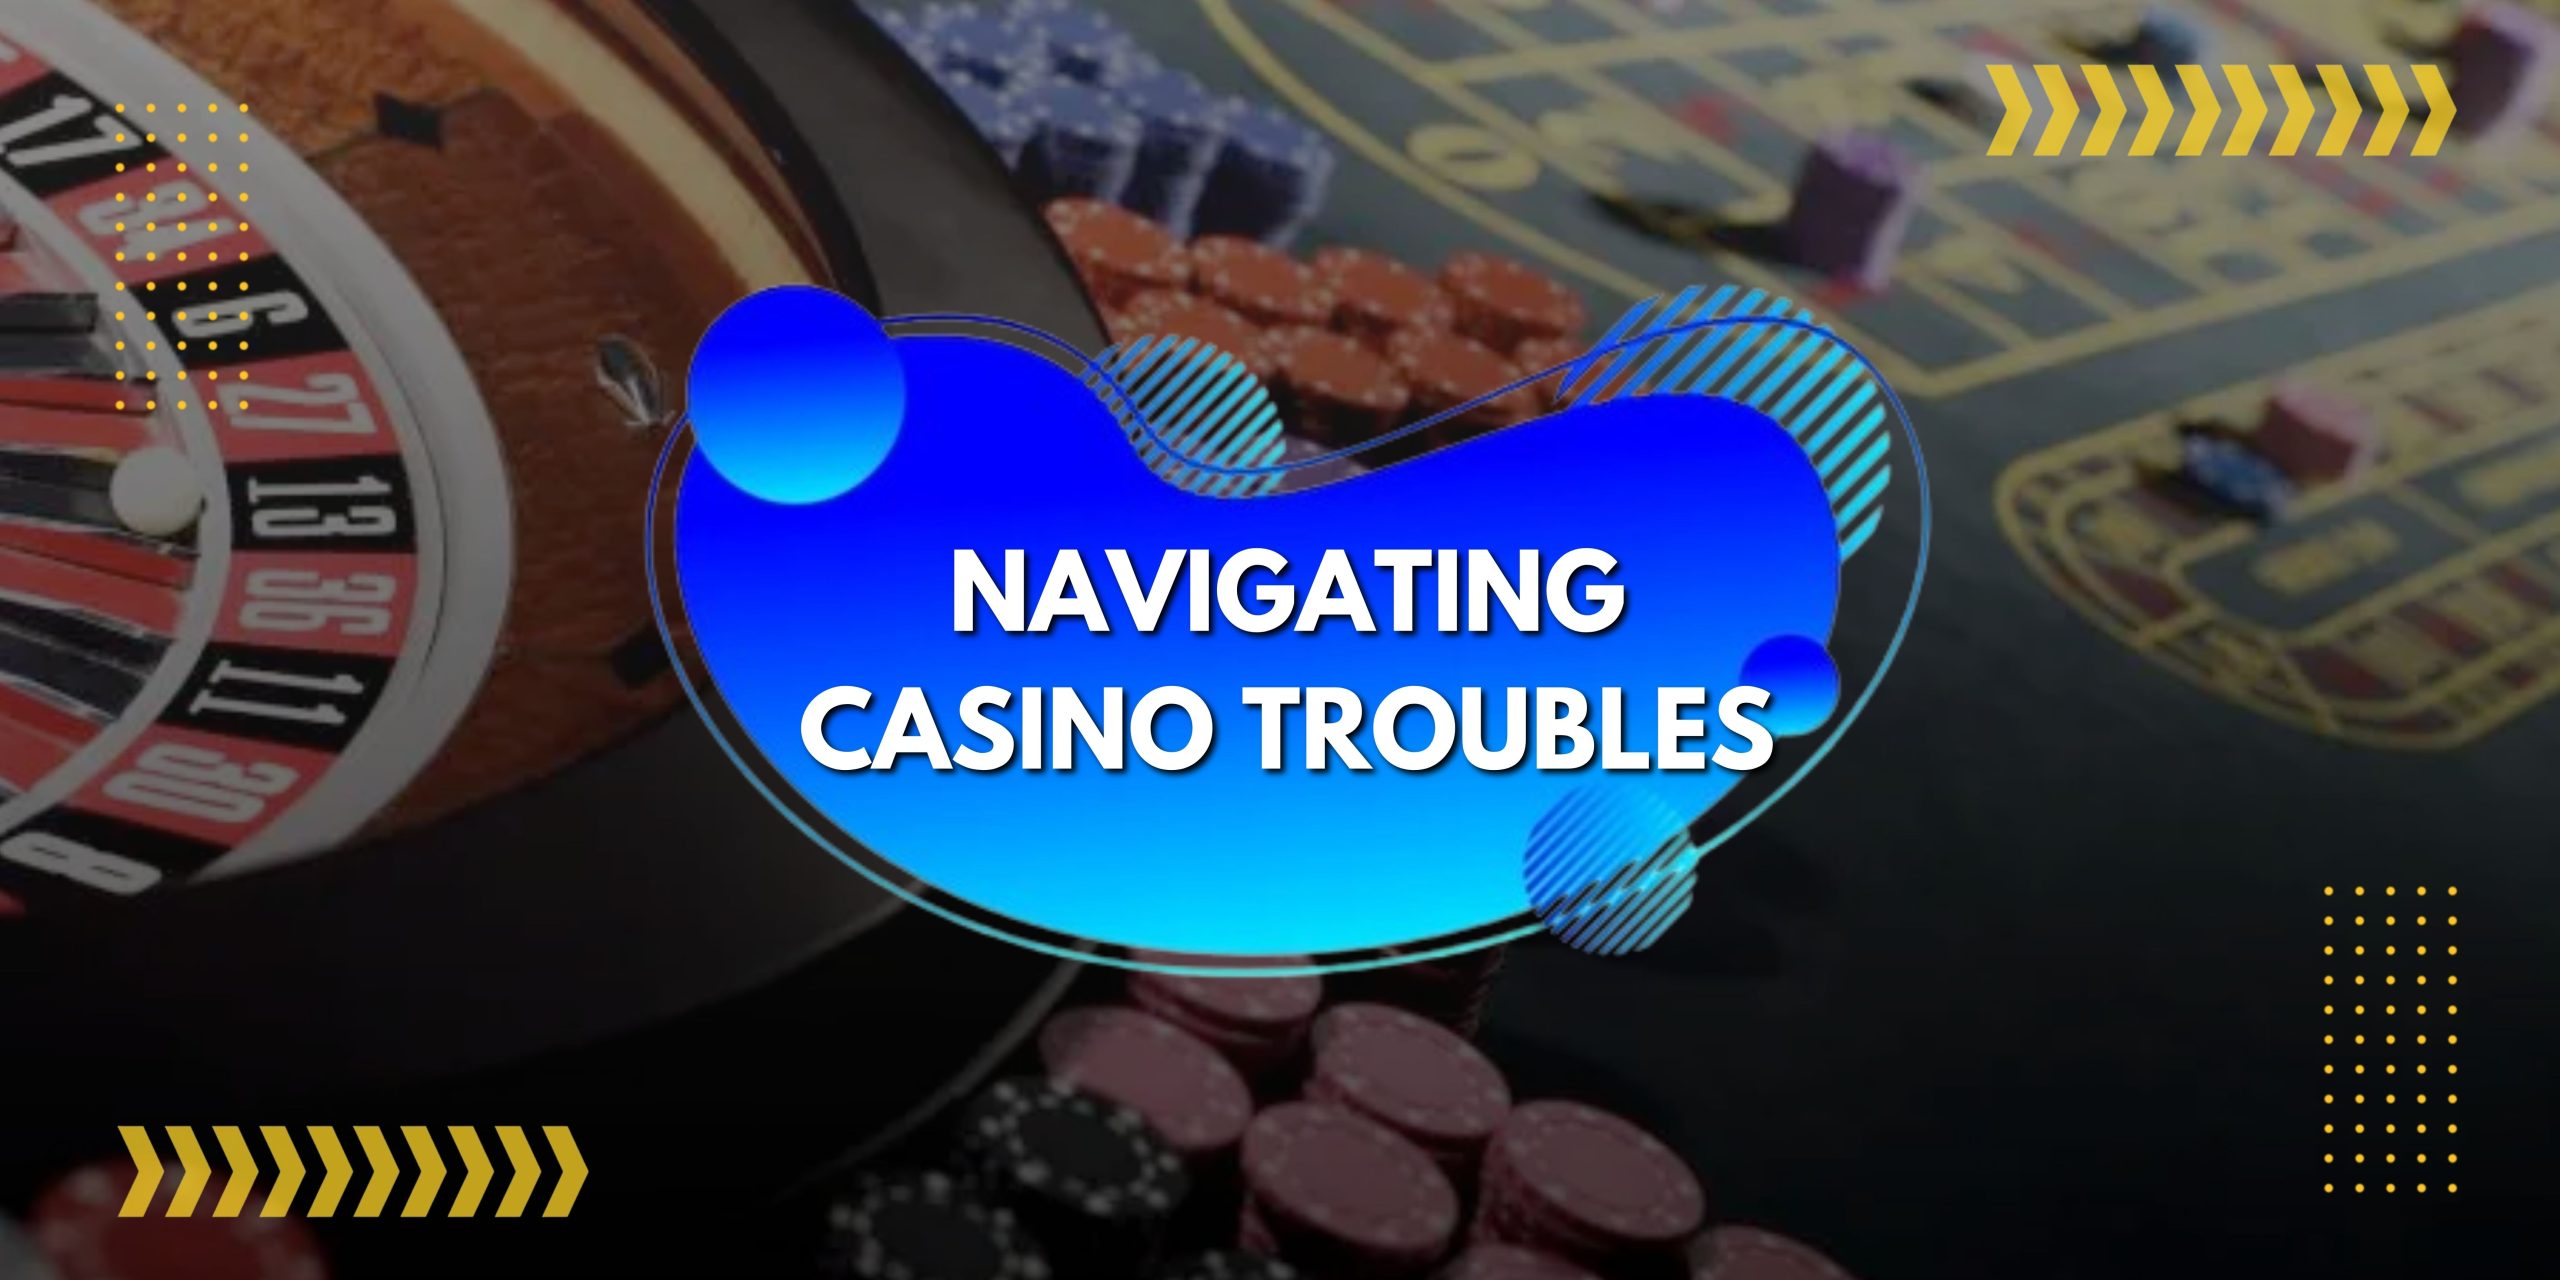 Navigating Casino Troubles